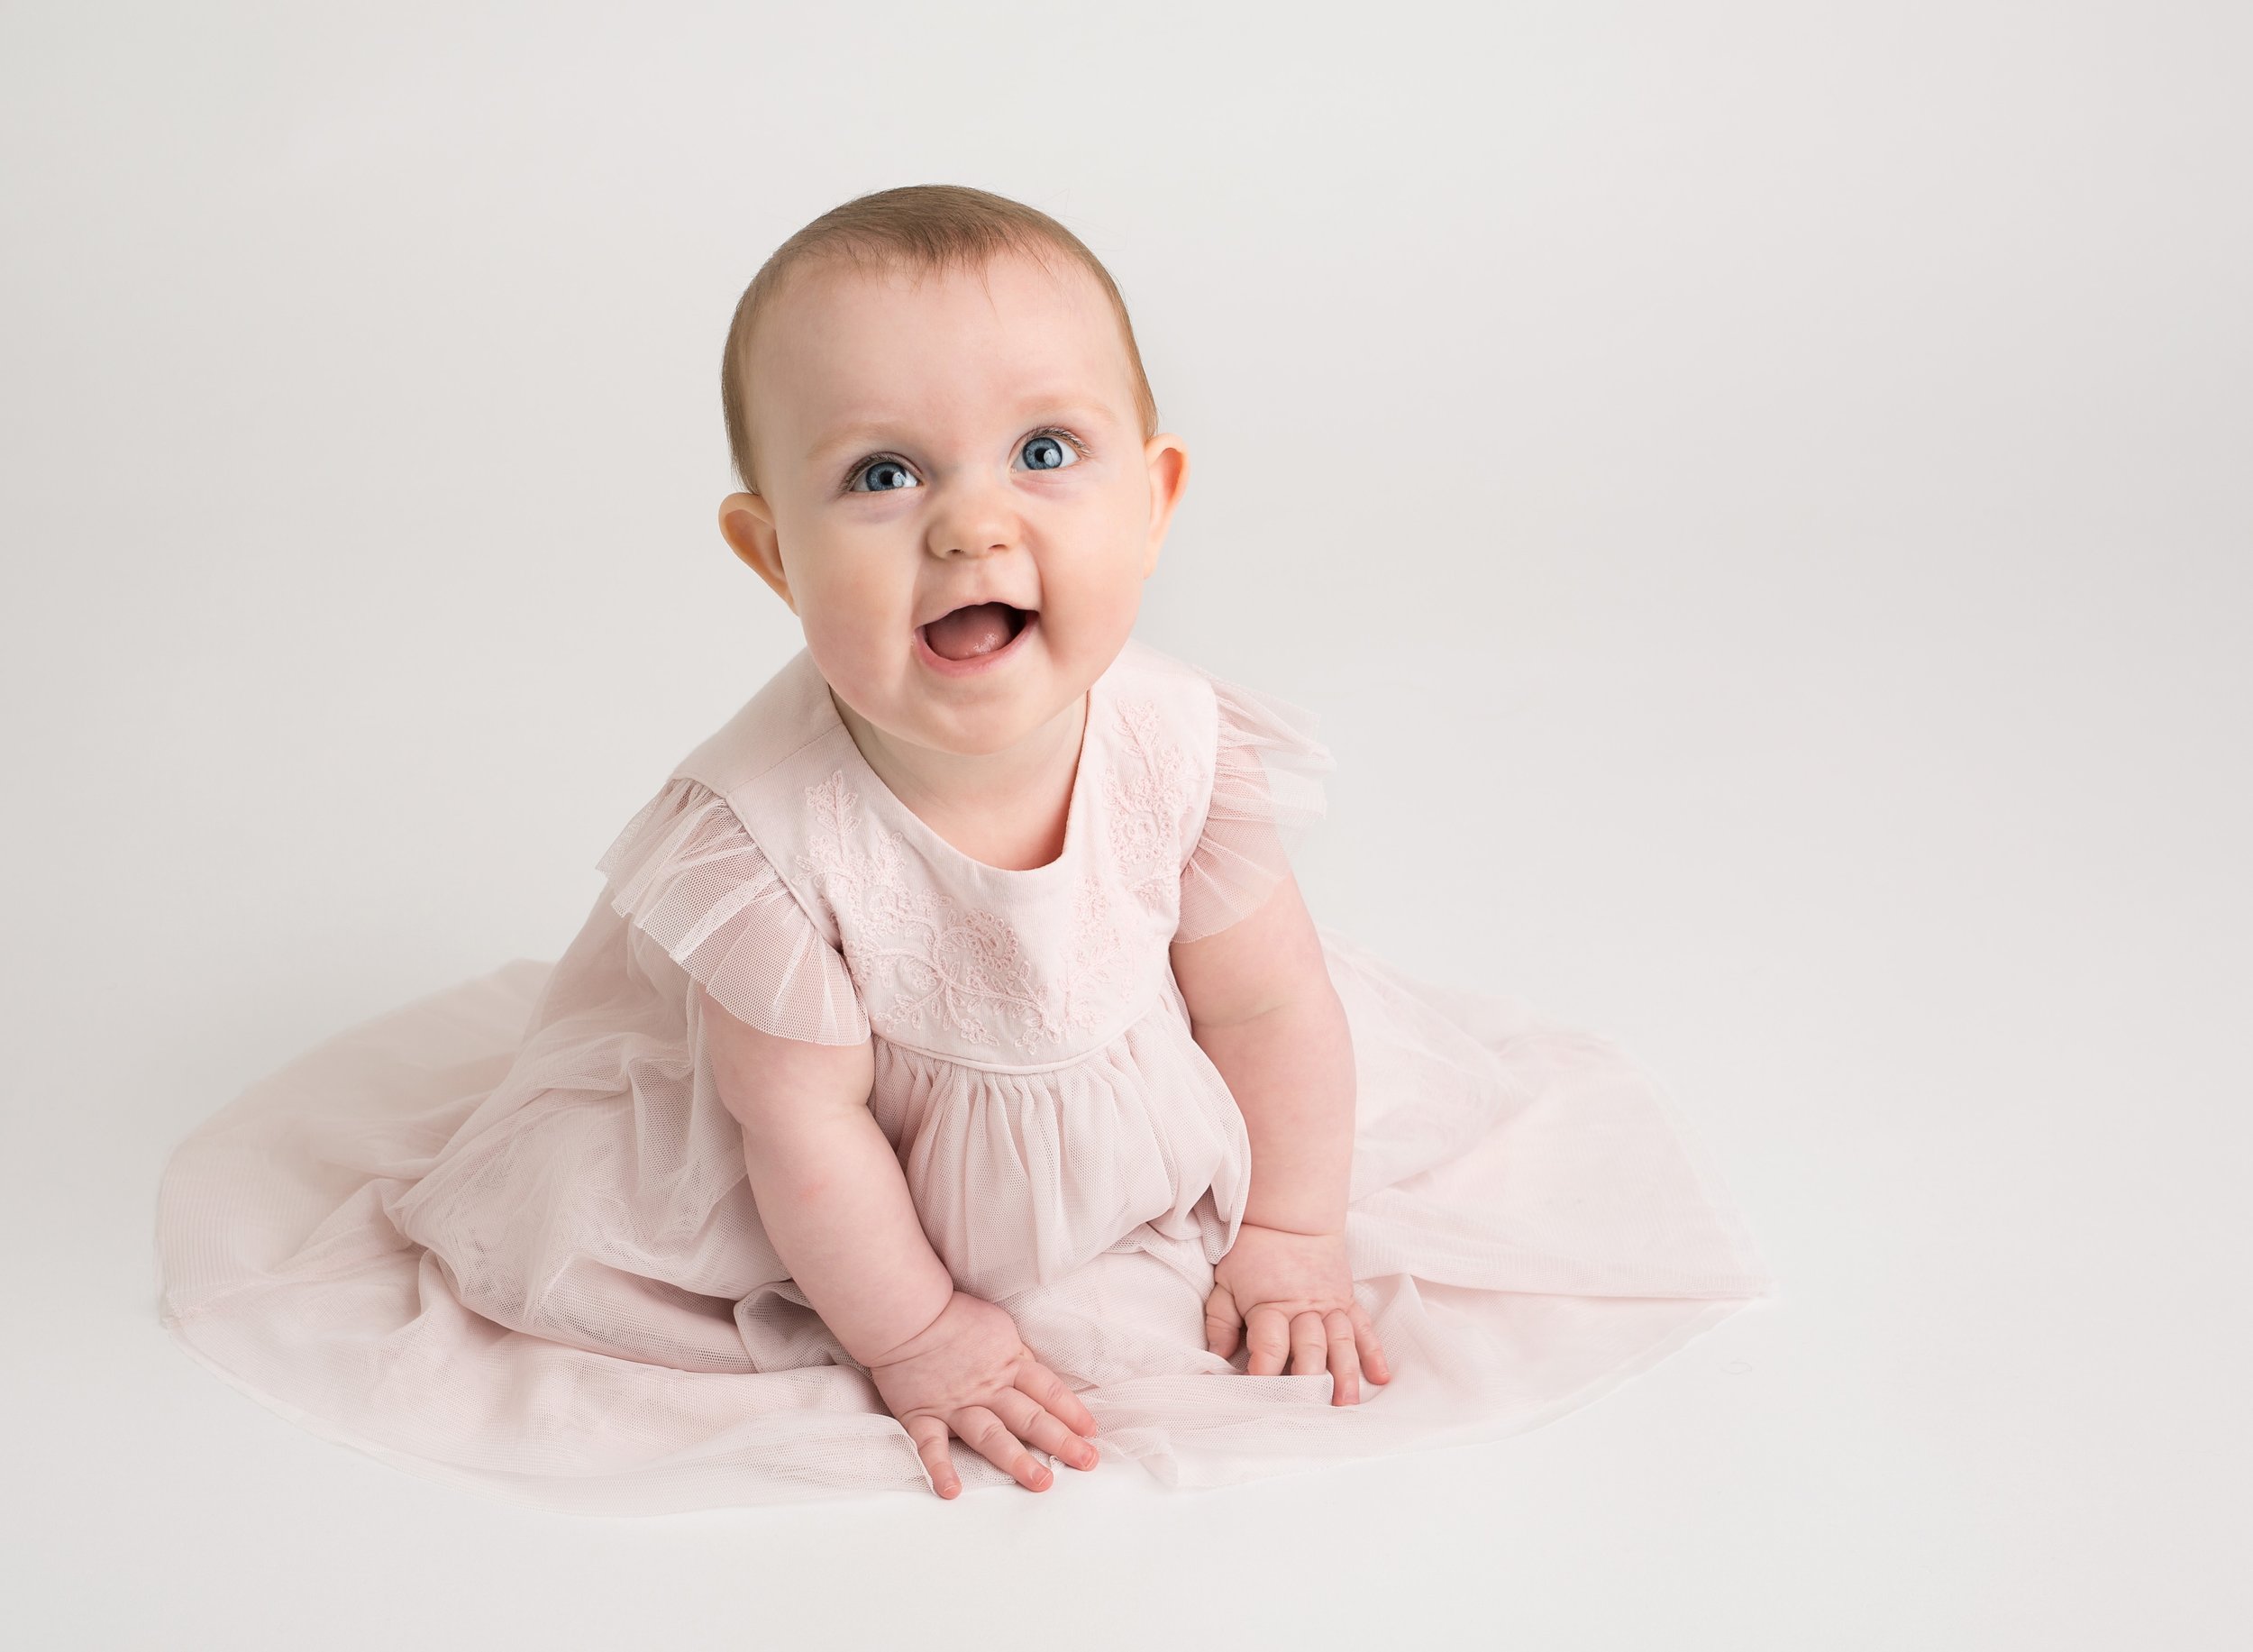 Newborn photographer in Manchester and Lancashire - baby photos, bump to baby, cake smash &amp; maternity from Rawtenstall photographer Lucie Woods Photography. Take a look at